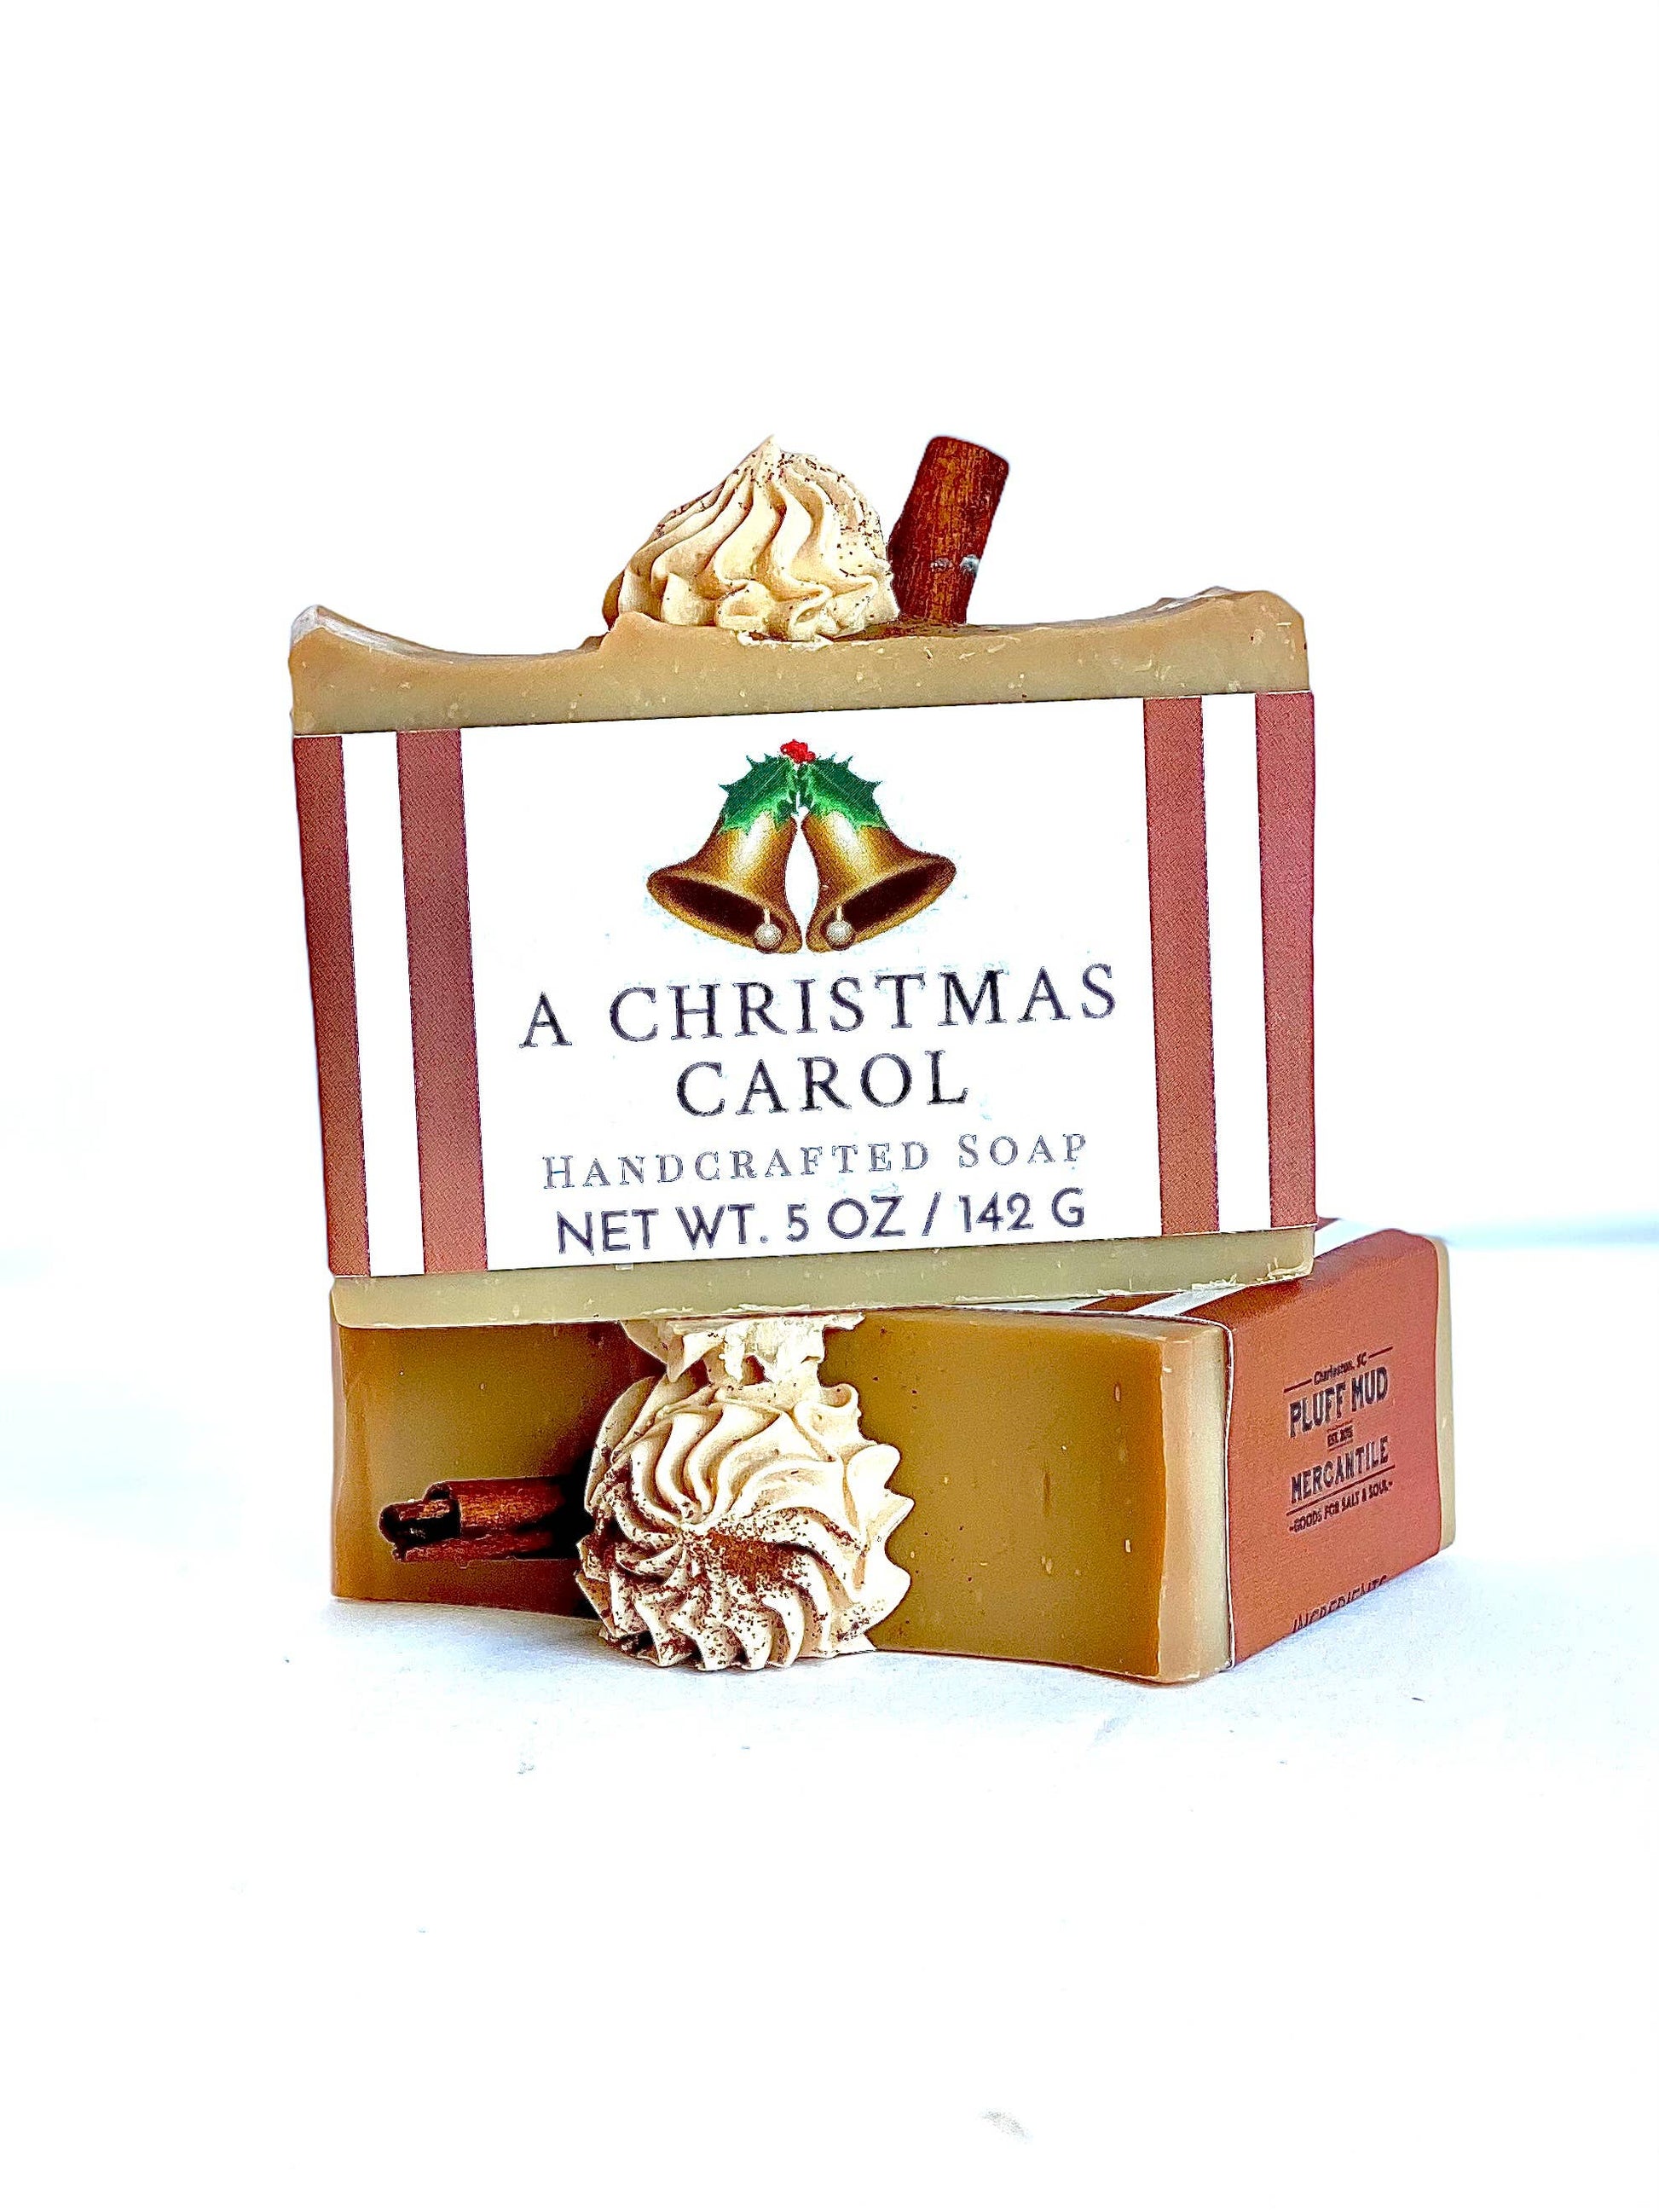 5 oz A Christmas Carol Handcrafted Soap - Pluff Mud Mercantile